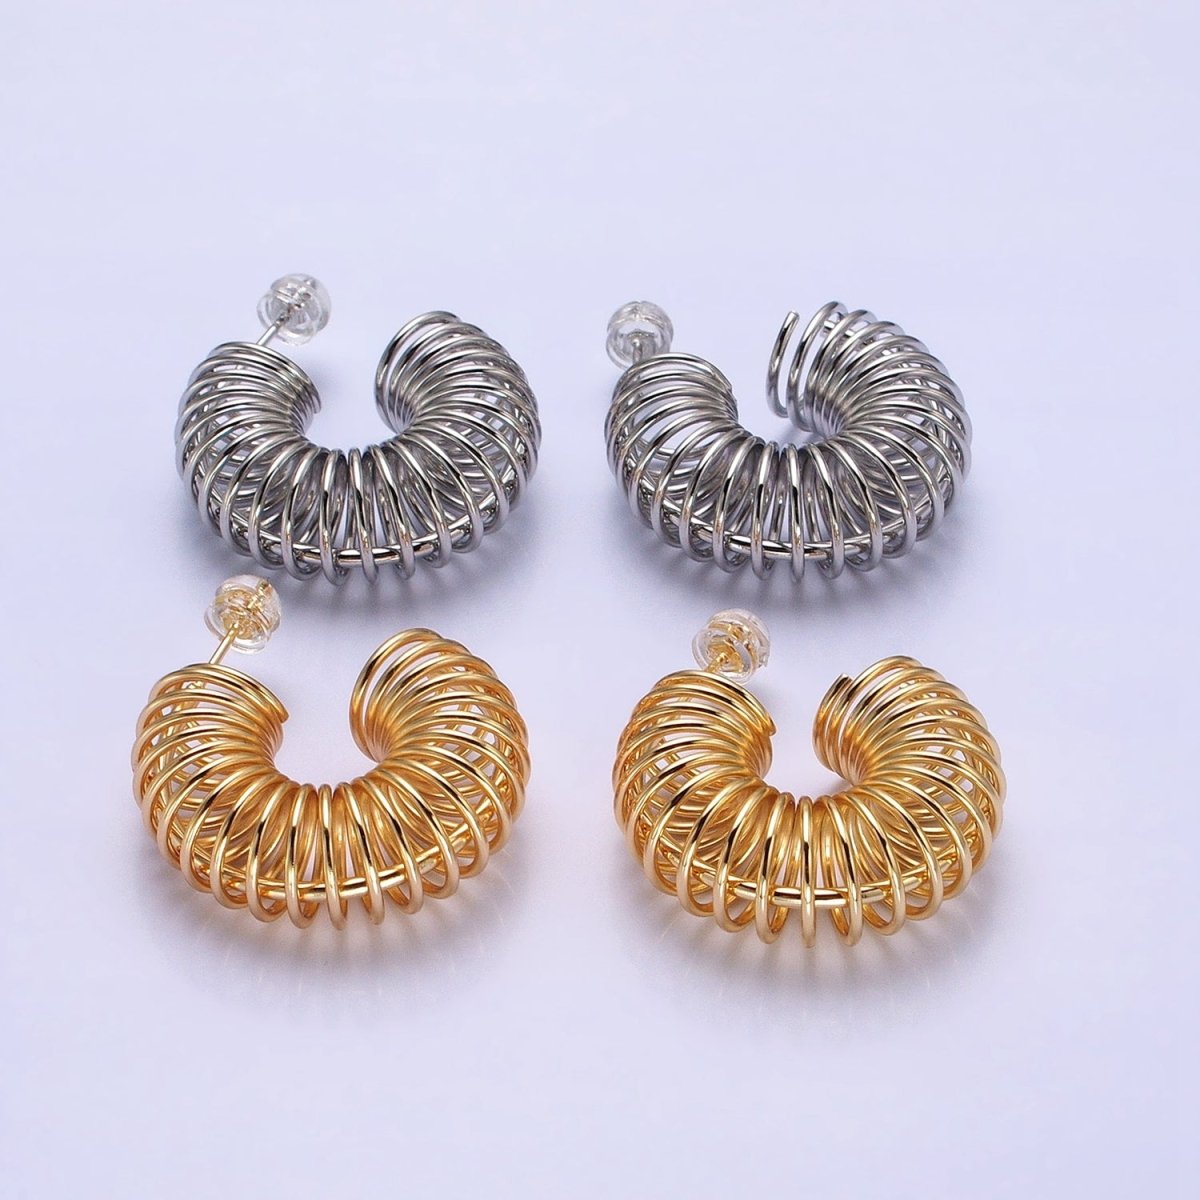 Gold Coil Wire Gold Hoop Earrings, Spiral Hoops Gold Twisted Earrings Spiral Earring AB933 AB935 - DLUXCA